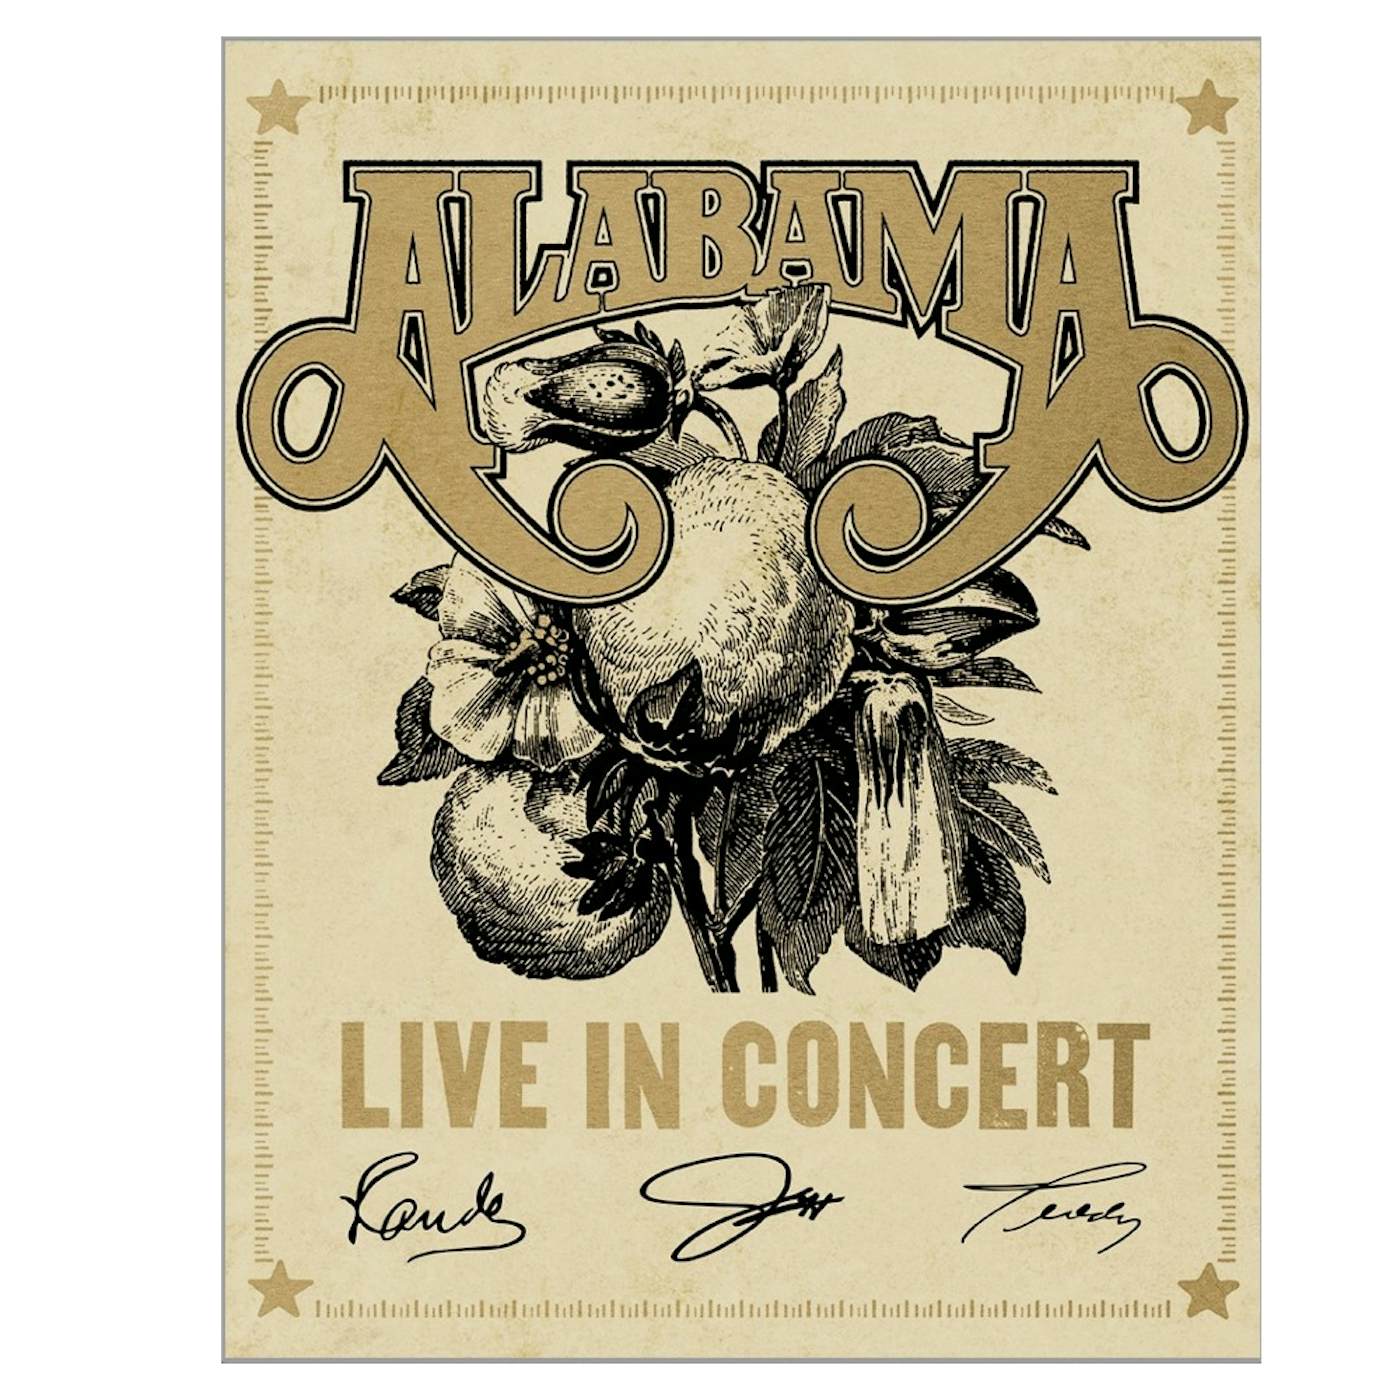 Alabama 11"x14" Live In Concert Poster